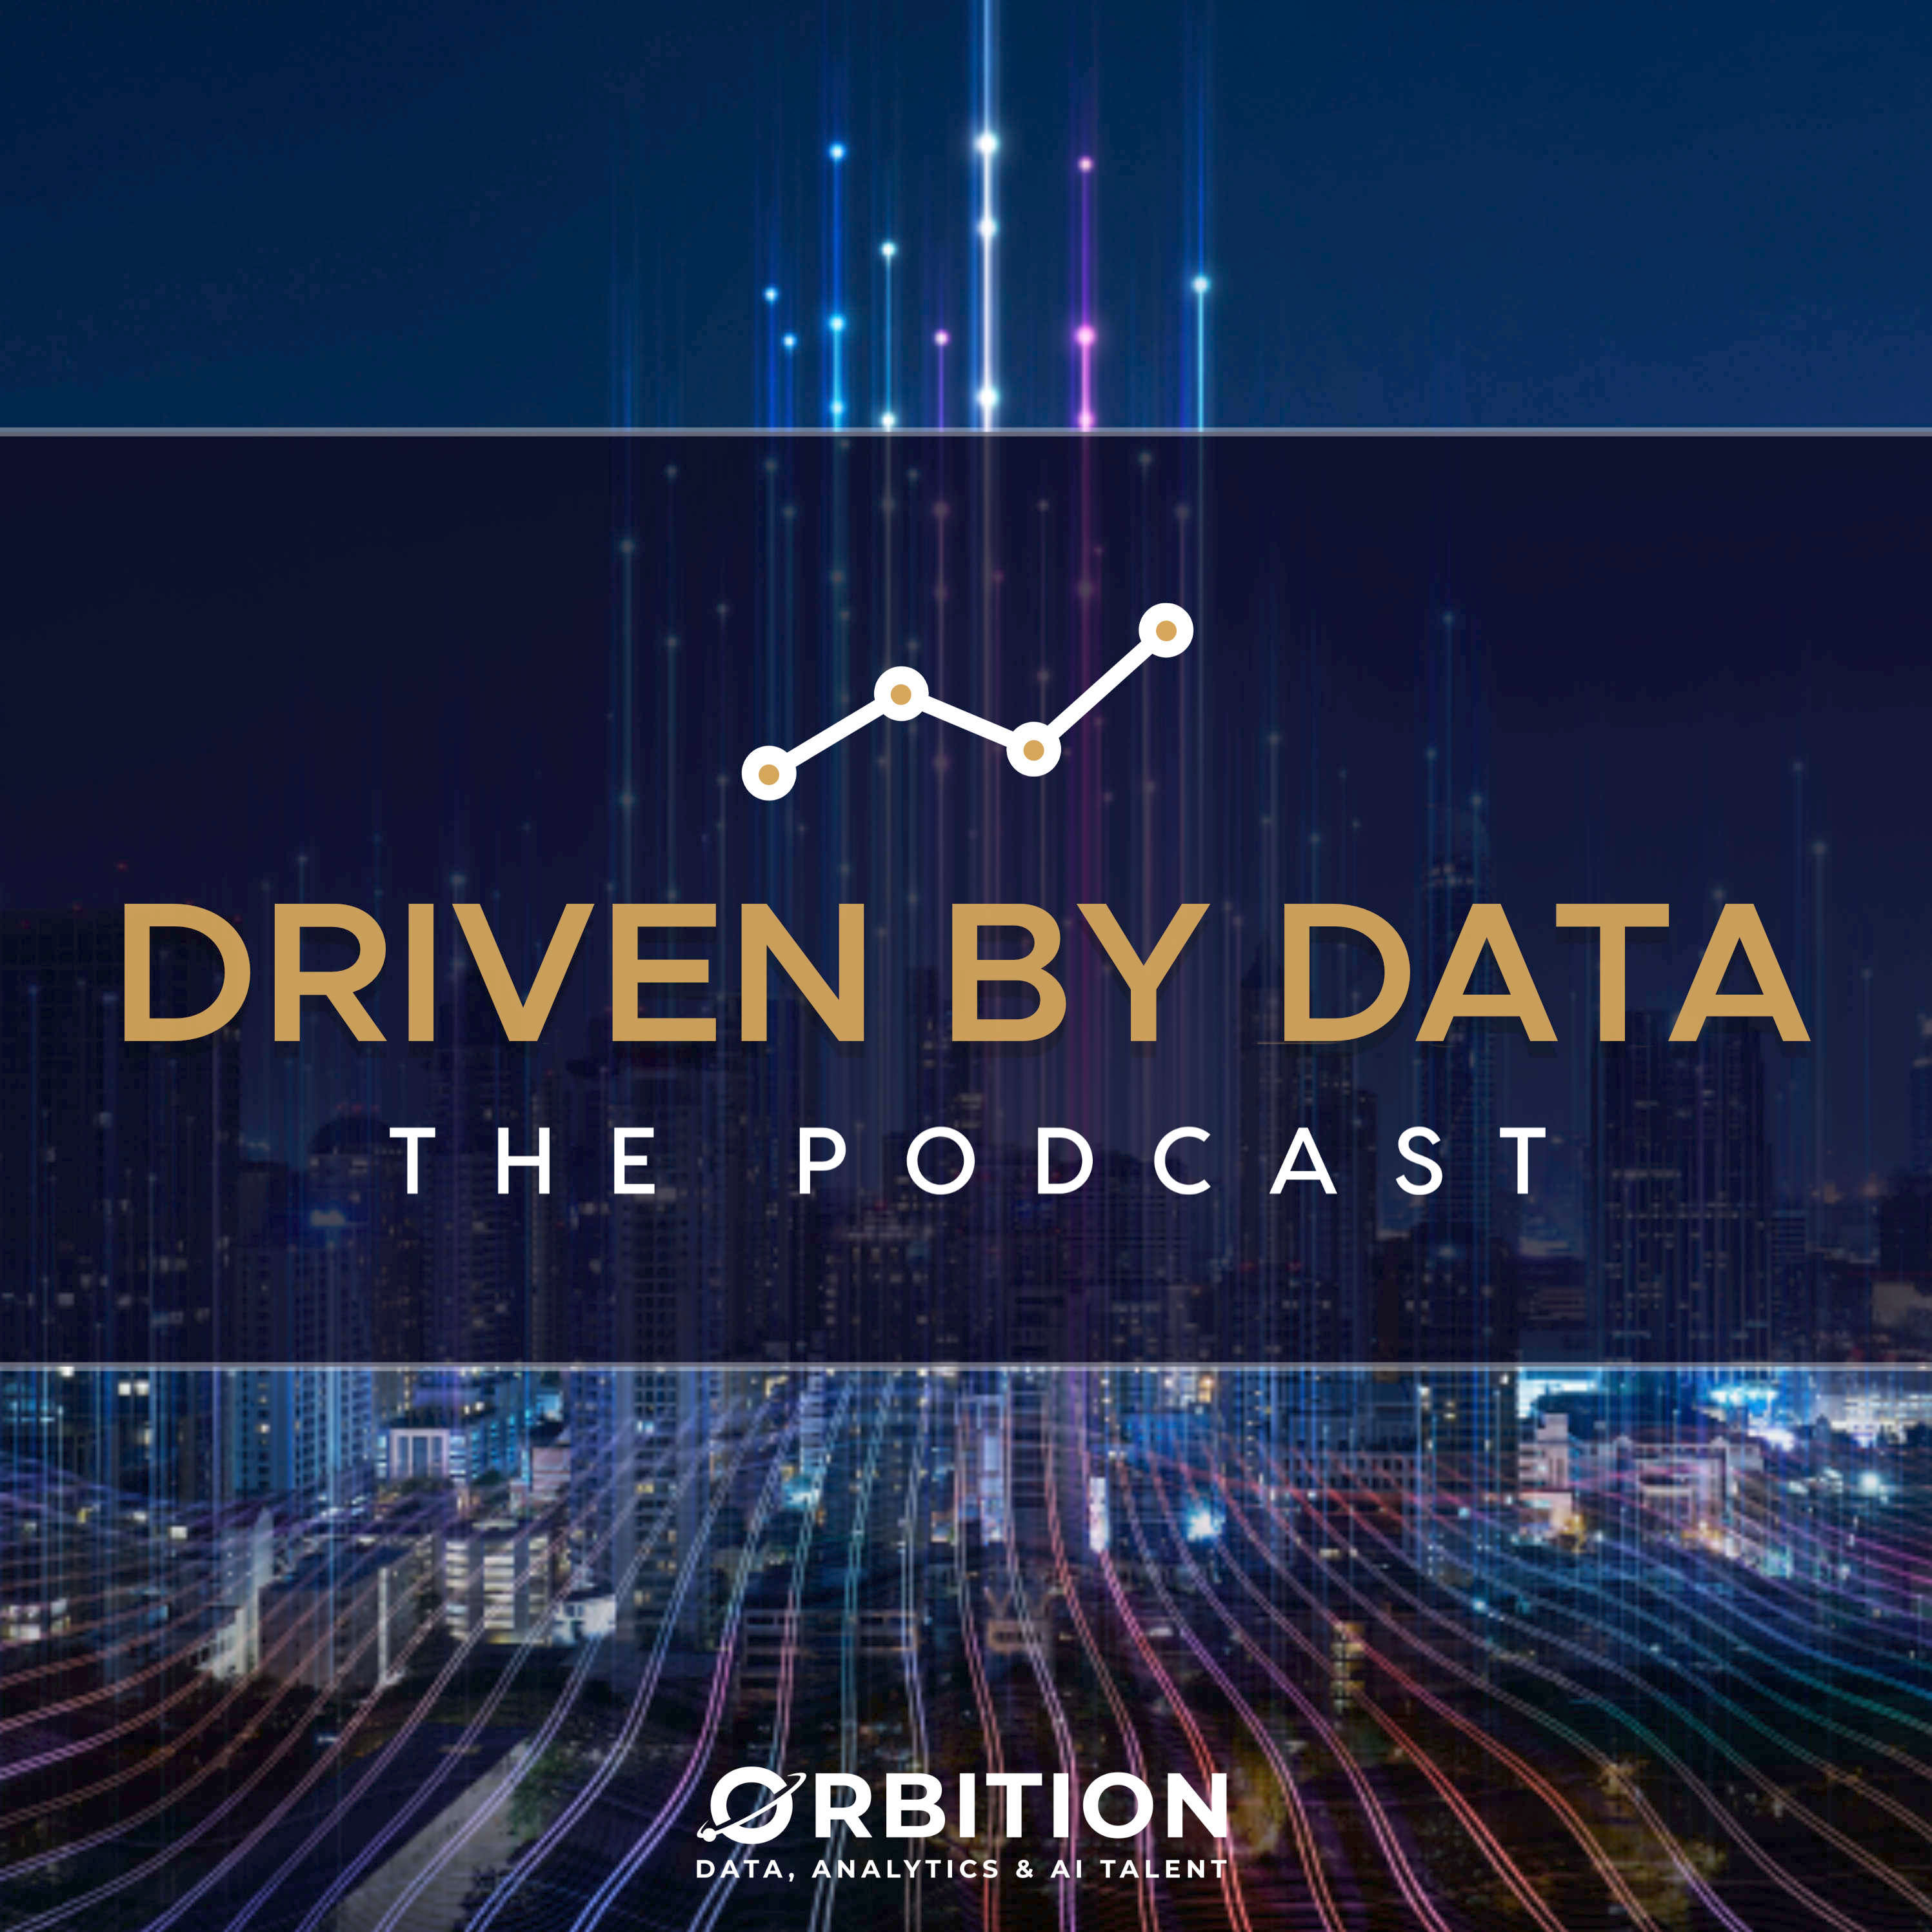 Driven by Data: The Podcast